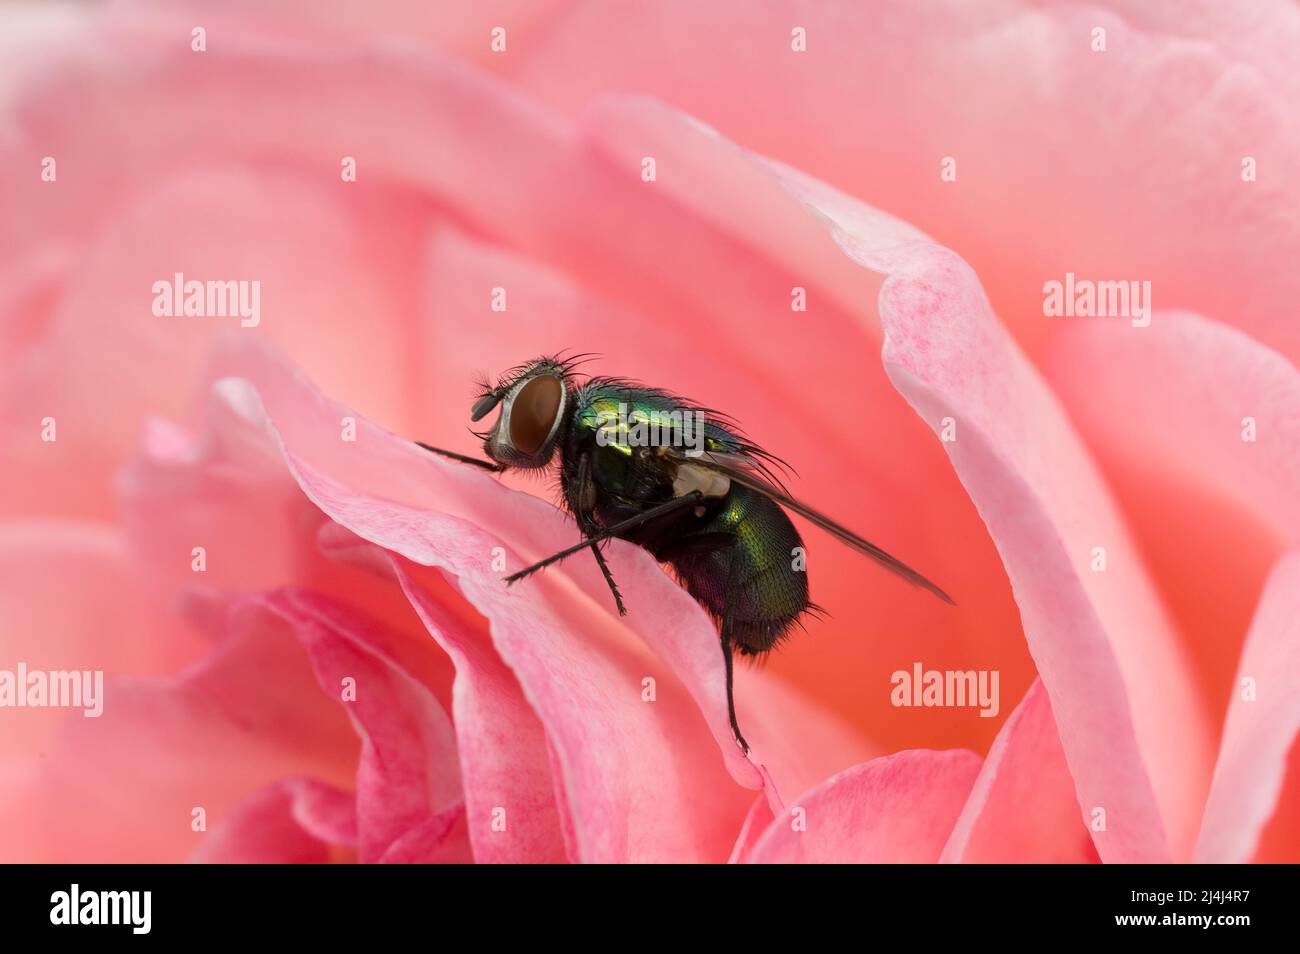 A close up of a blow fly resting on a beautiful pink rose in the early morning Stock Photo